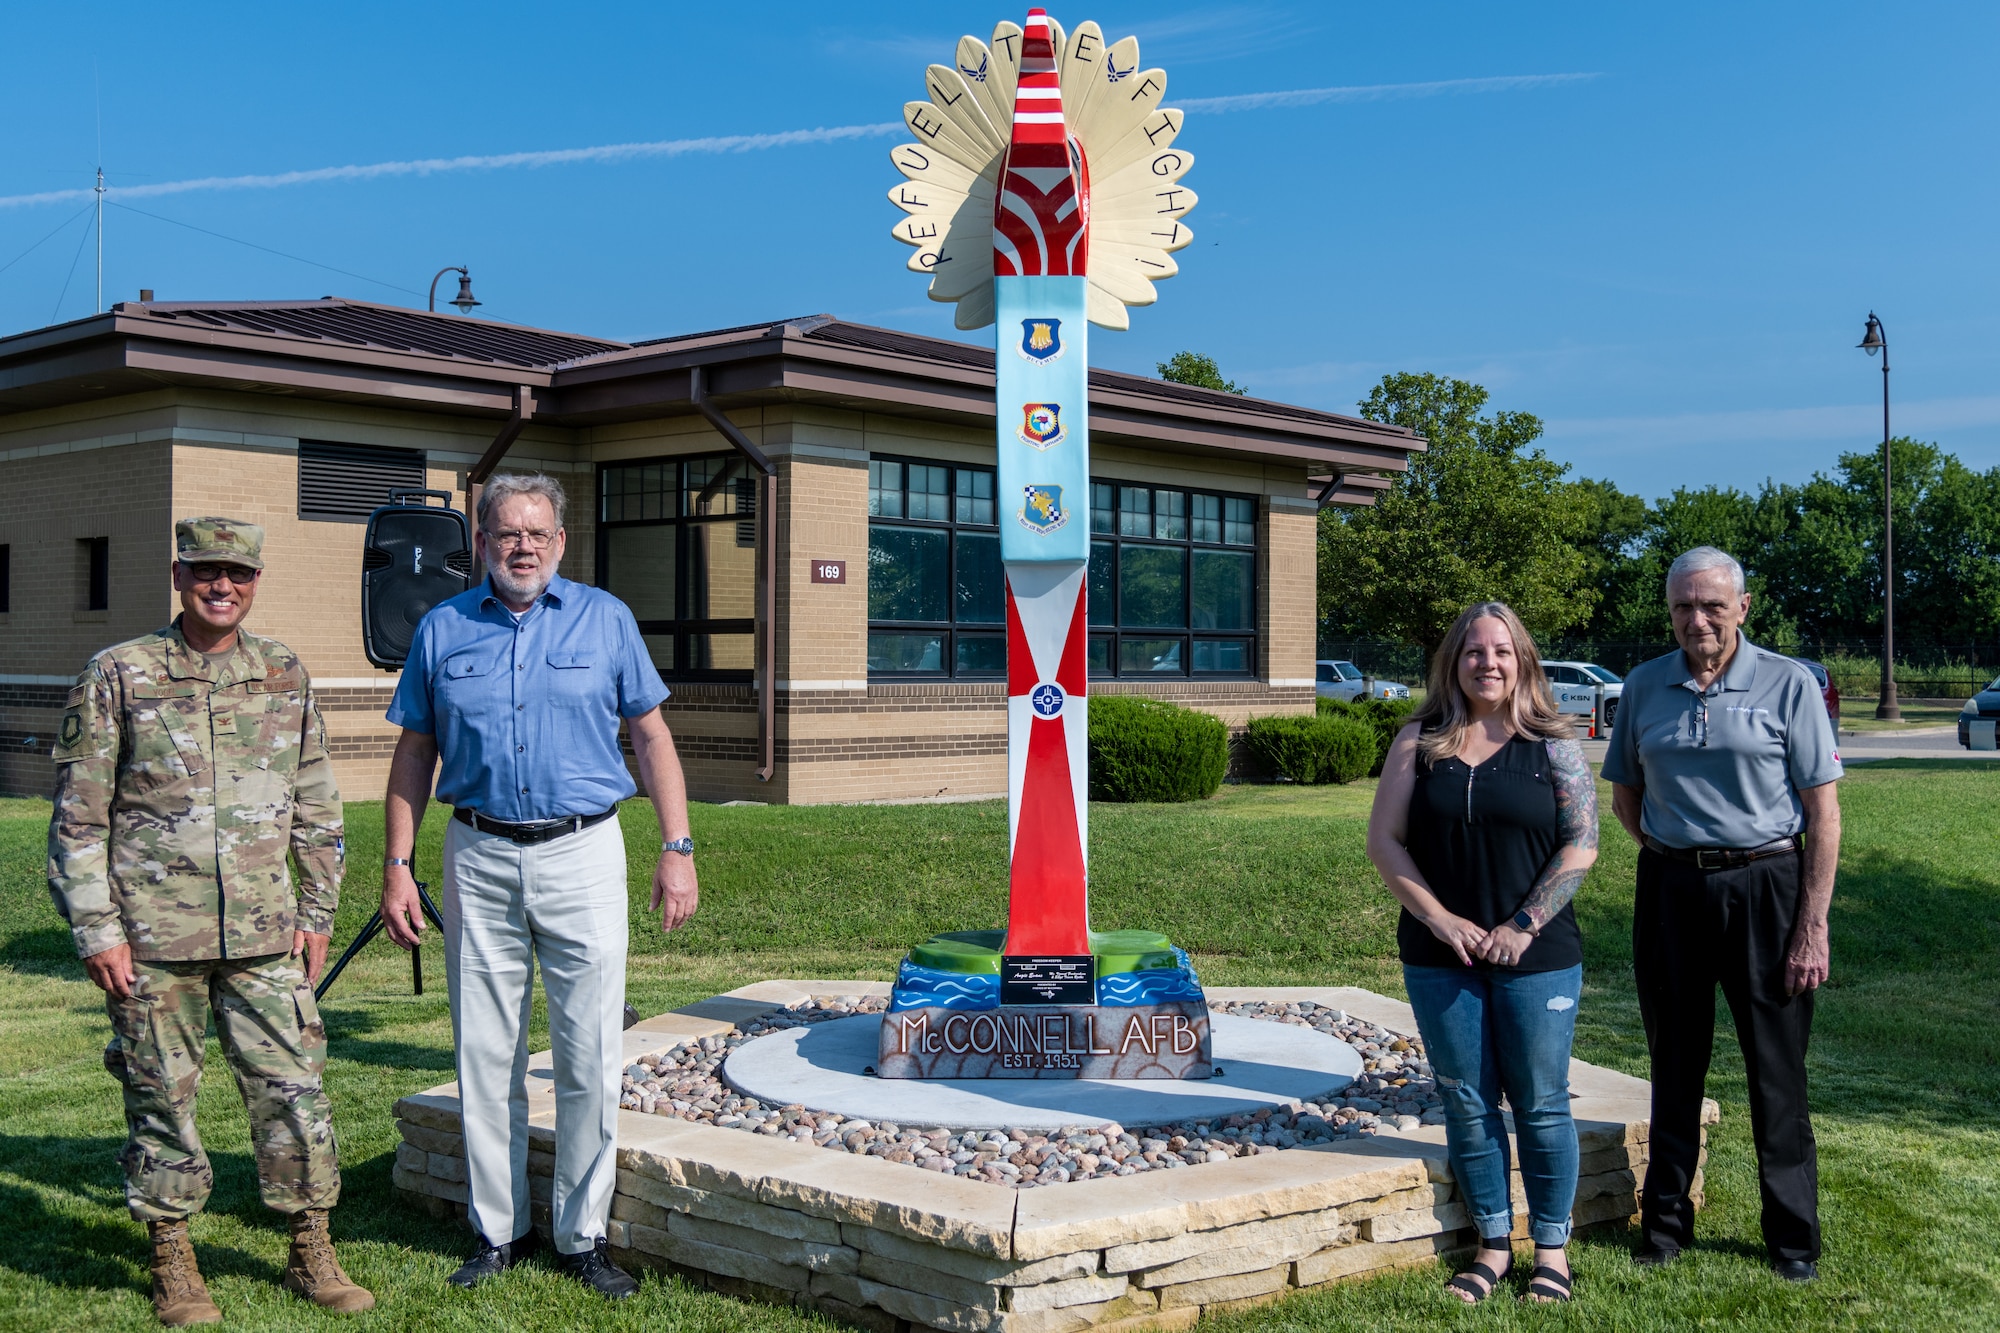 (From left to right) Col. Nate Vogel, 22nd Air Refueling Wing commander, Vincent Fredericksen, 22nd Civil Engineer Squadron base architect, Angie Evans, Wichita artist, and Jack Pulley, president of Friends of McConnell, pose for a photo next to the Keeper of the Plains replica donated to the base July 23, 2021, at McConnell Air Force Base, Kansas. The ten-foot-tall Keeper was donated by the Friends of McConnell organization and designed by Vincent Fredericksen, 22nd Civil Engineer Squadron base architect, and Staff Sgt. Trevor Bjelke, former 22nd Communications Squadron network infrastructure technician. (U.S. Air Force photo by Senior Airman Skyler Combs)